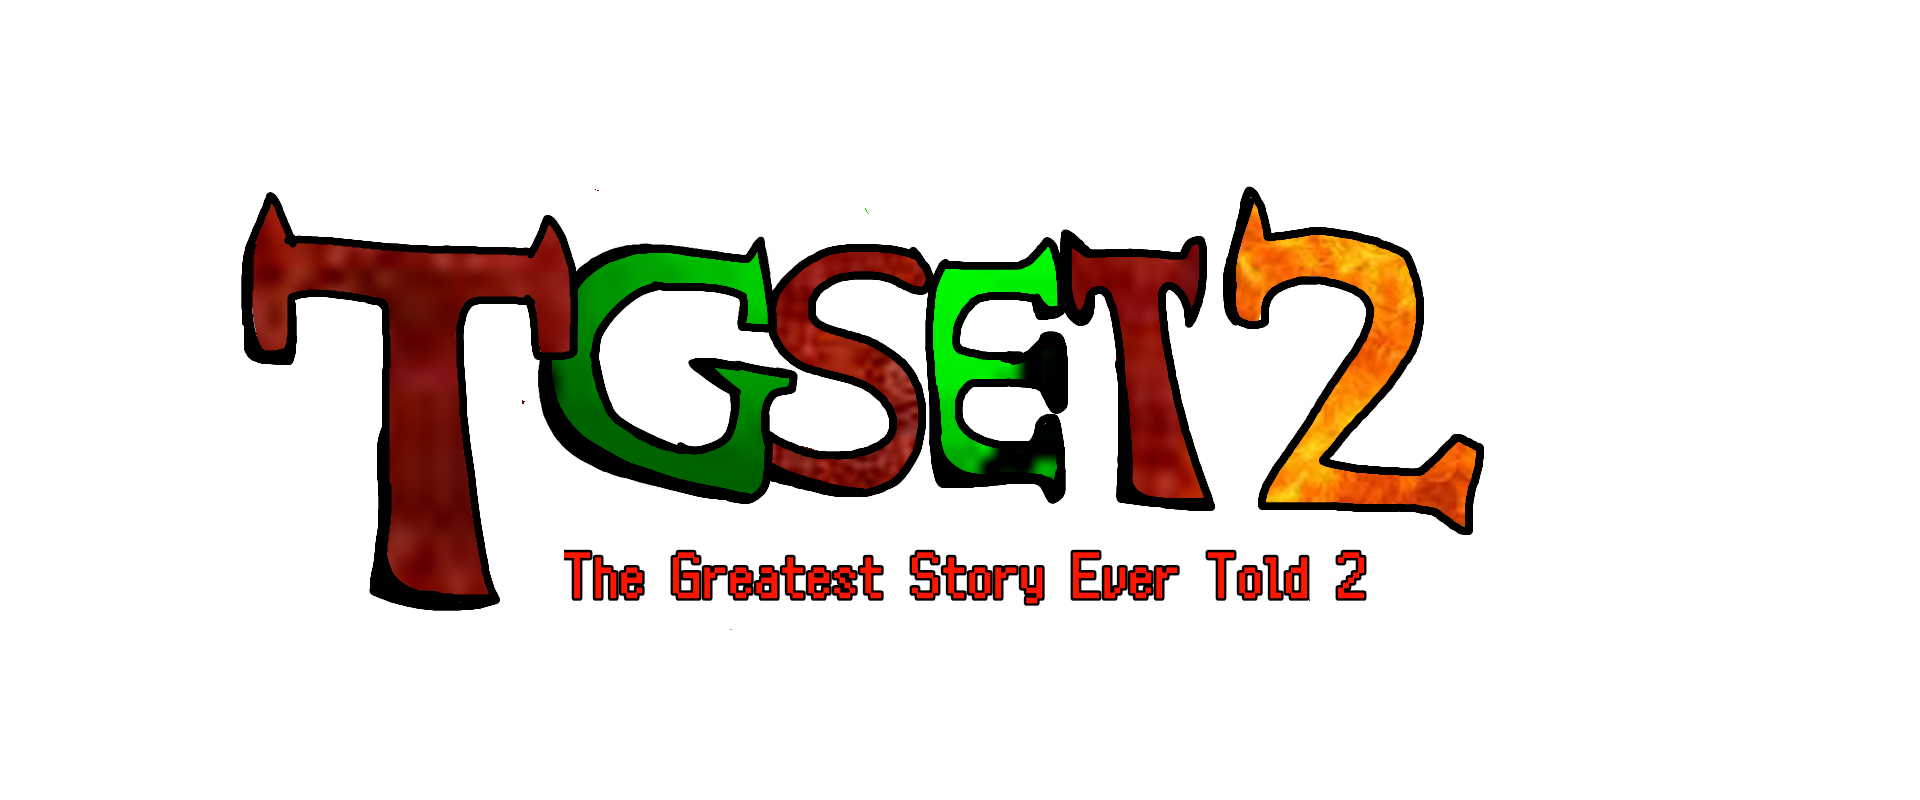 The Greatest Story Ever Told 2